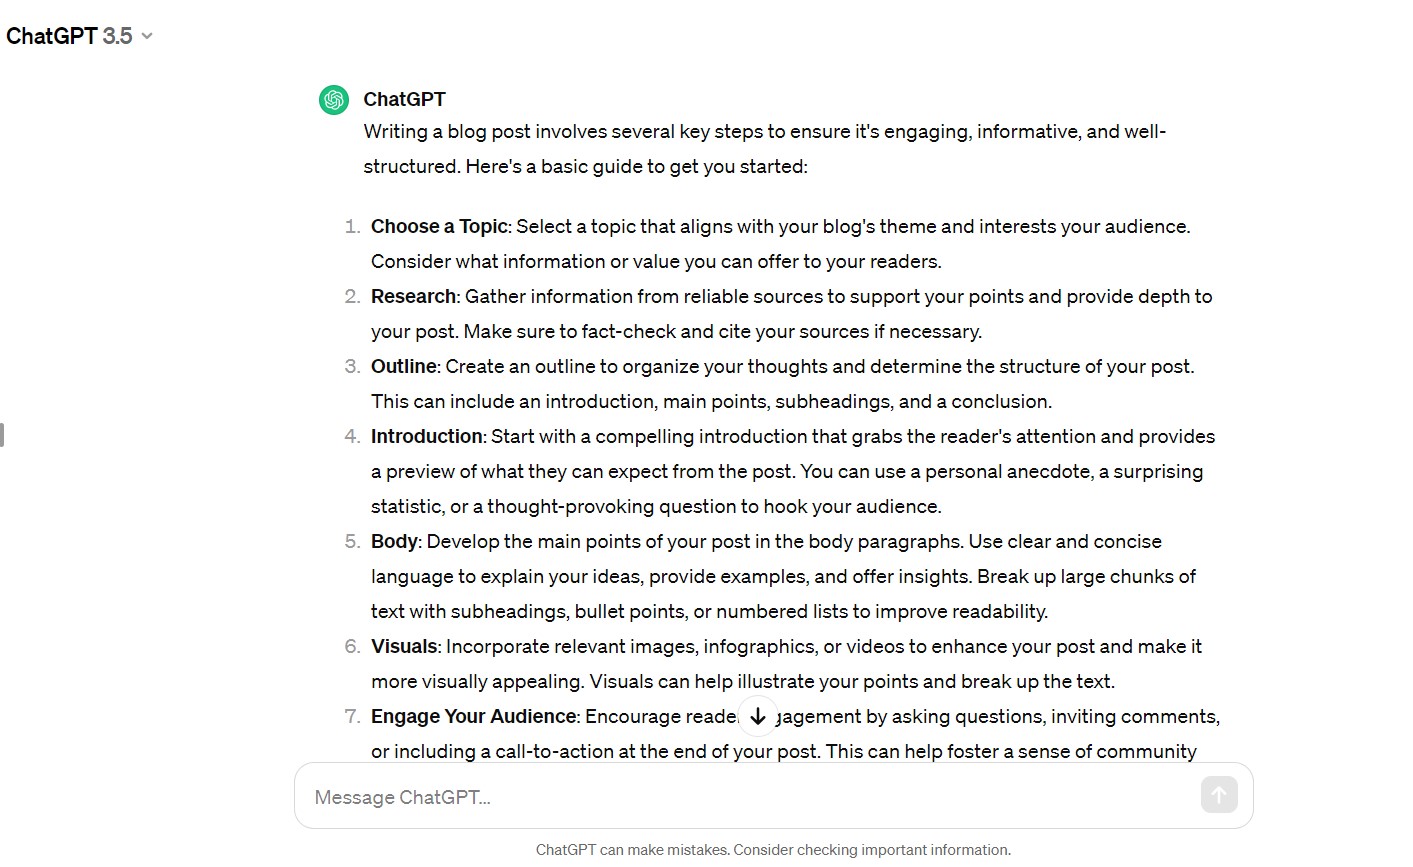 ChatGPT response for how to write a blog post